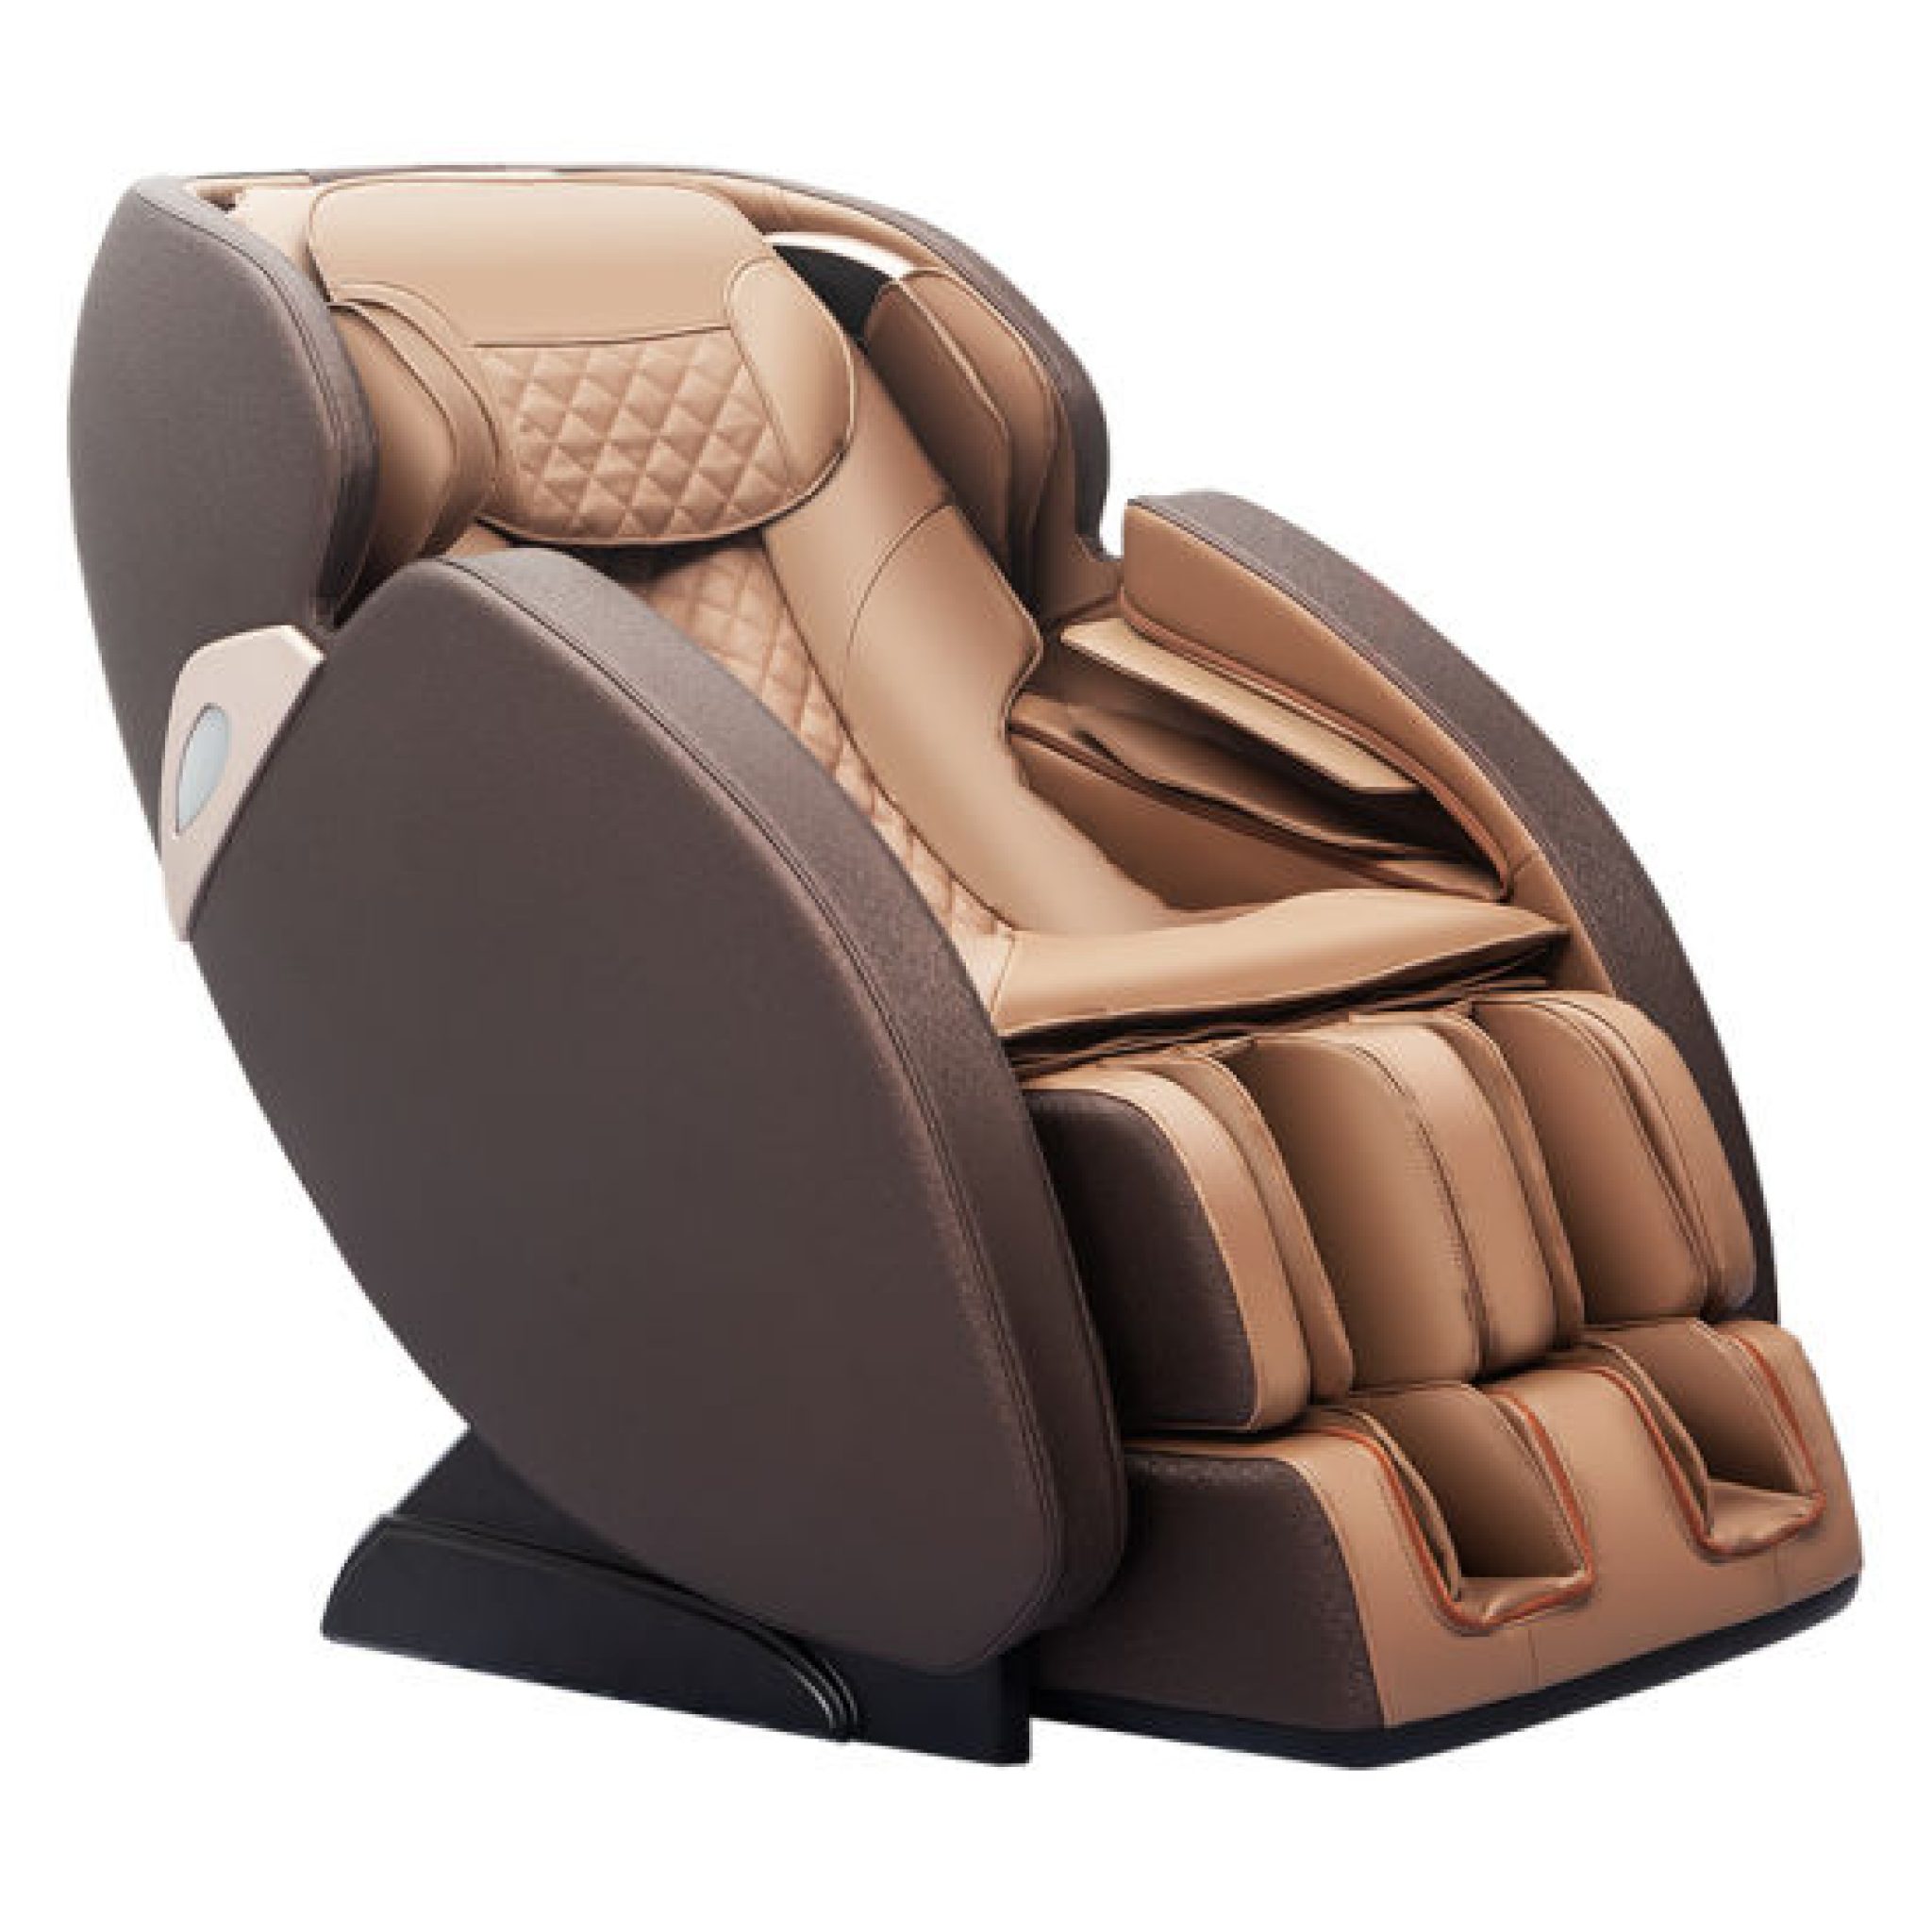 Best 5 Full Body Massage Chair Price in India Buy Online